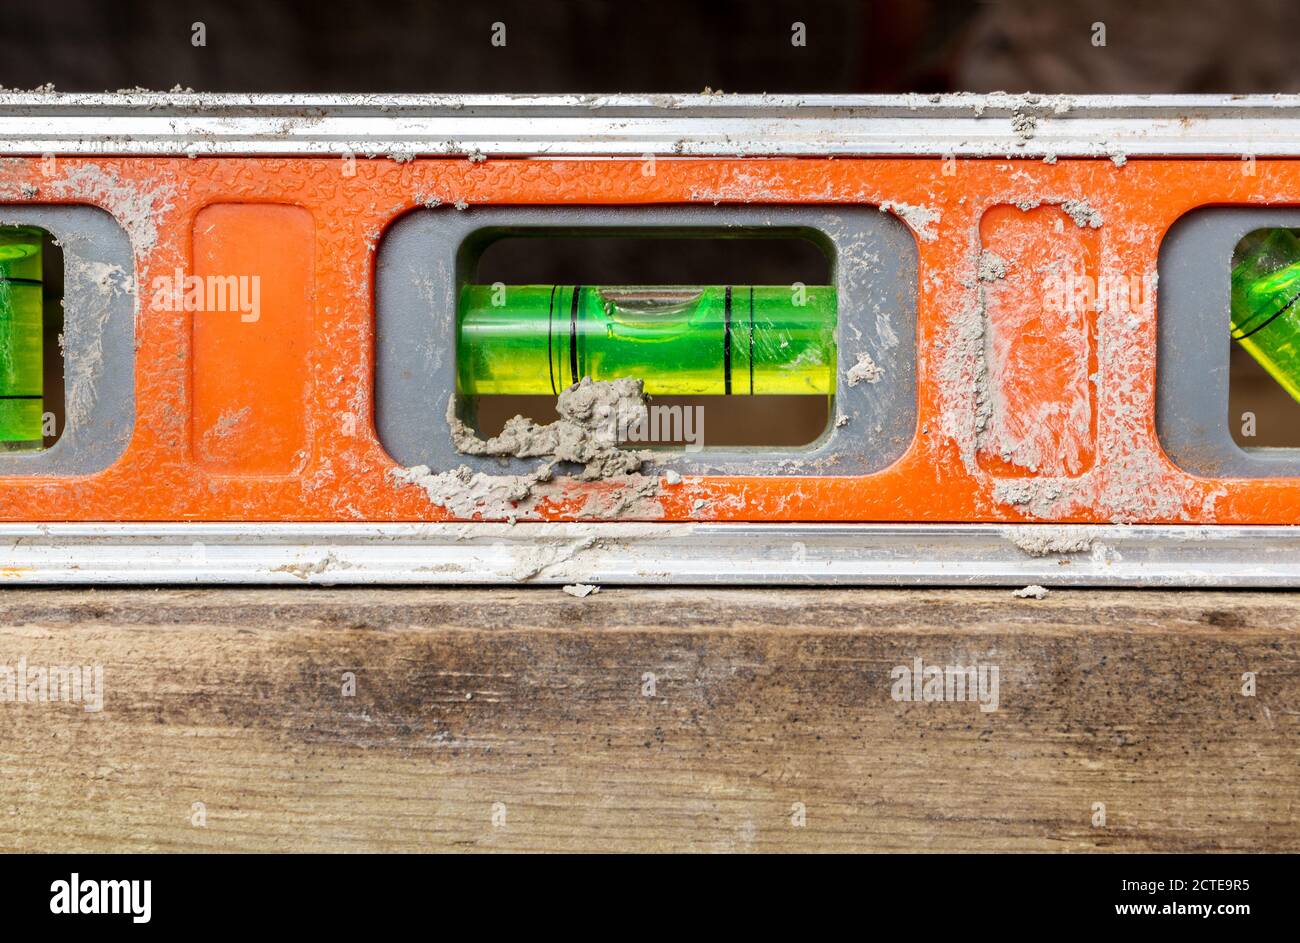 Dirty orange tool level in use, closeup. Also know as Tubular Spirit Level or Bubble Level. Used to find a true horizontal or vertical plane. Stock Photo